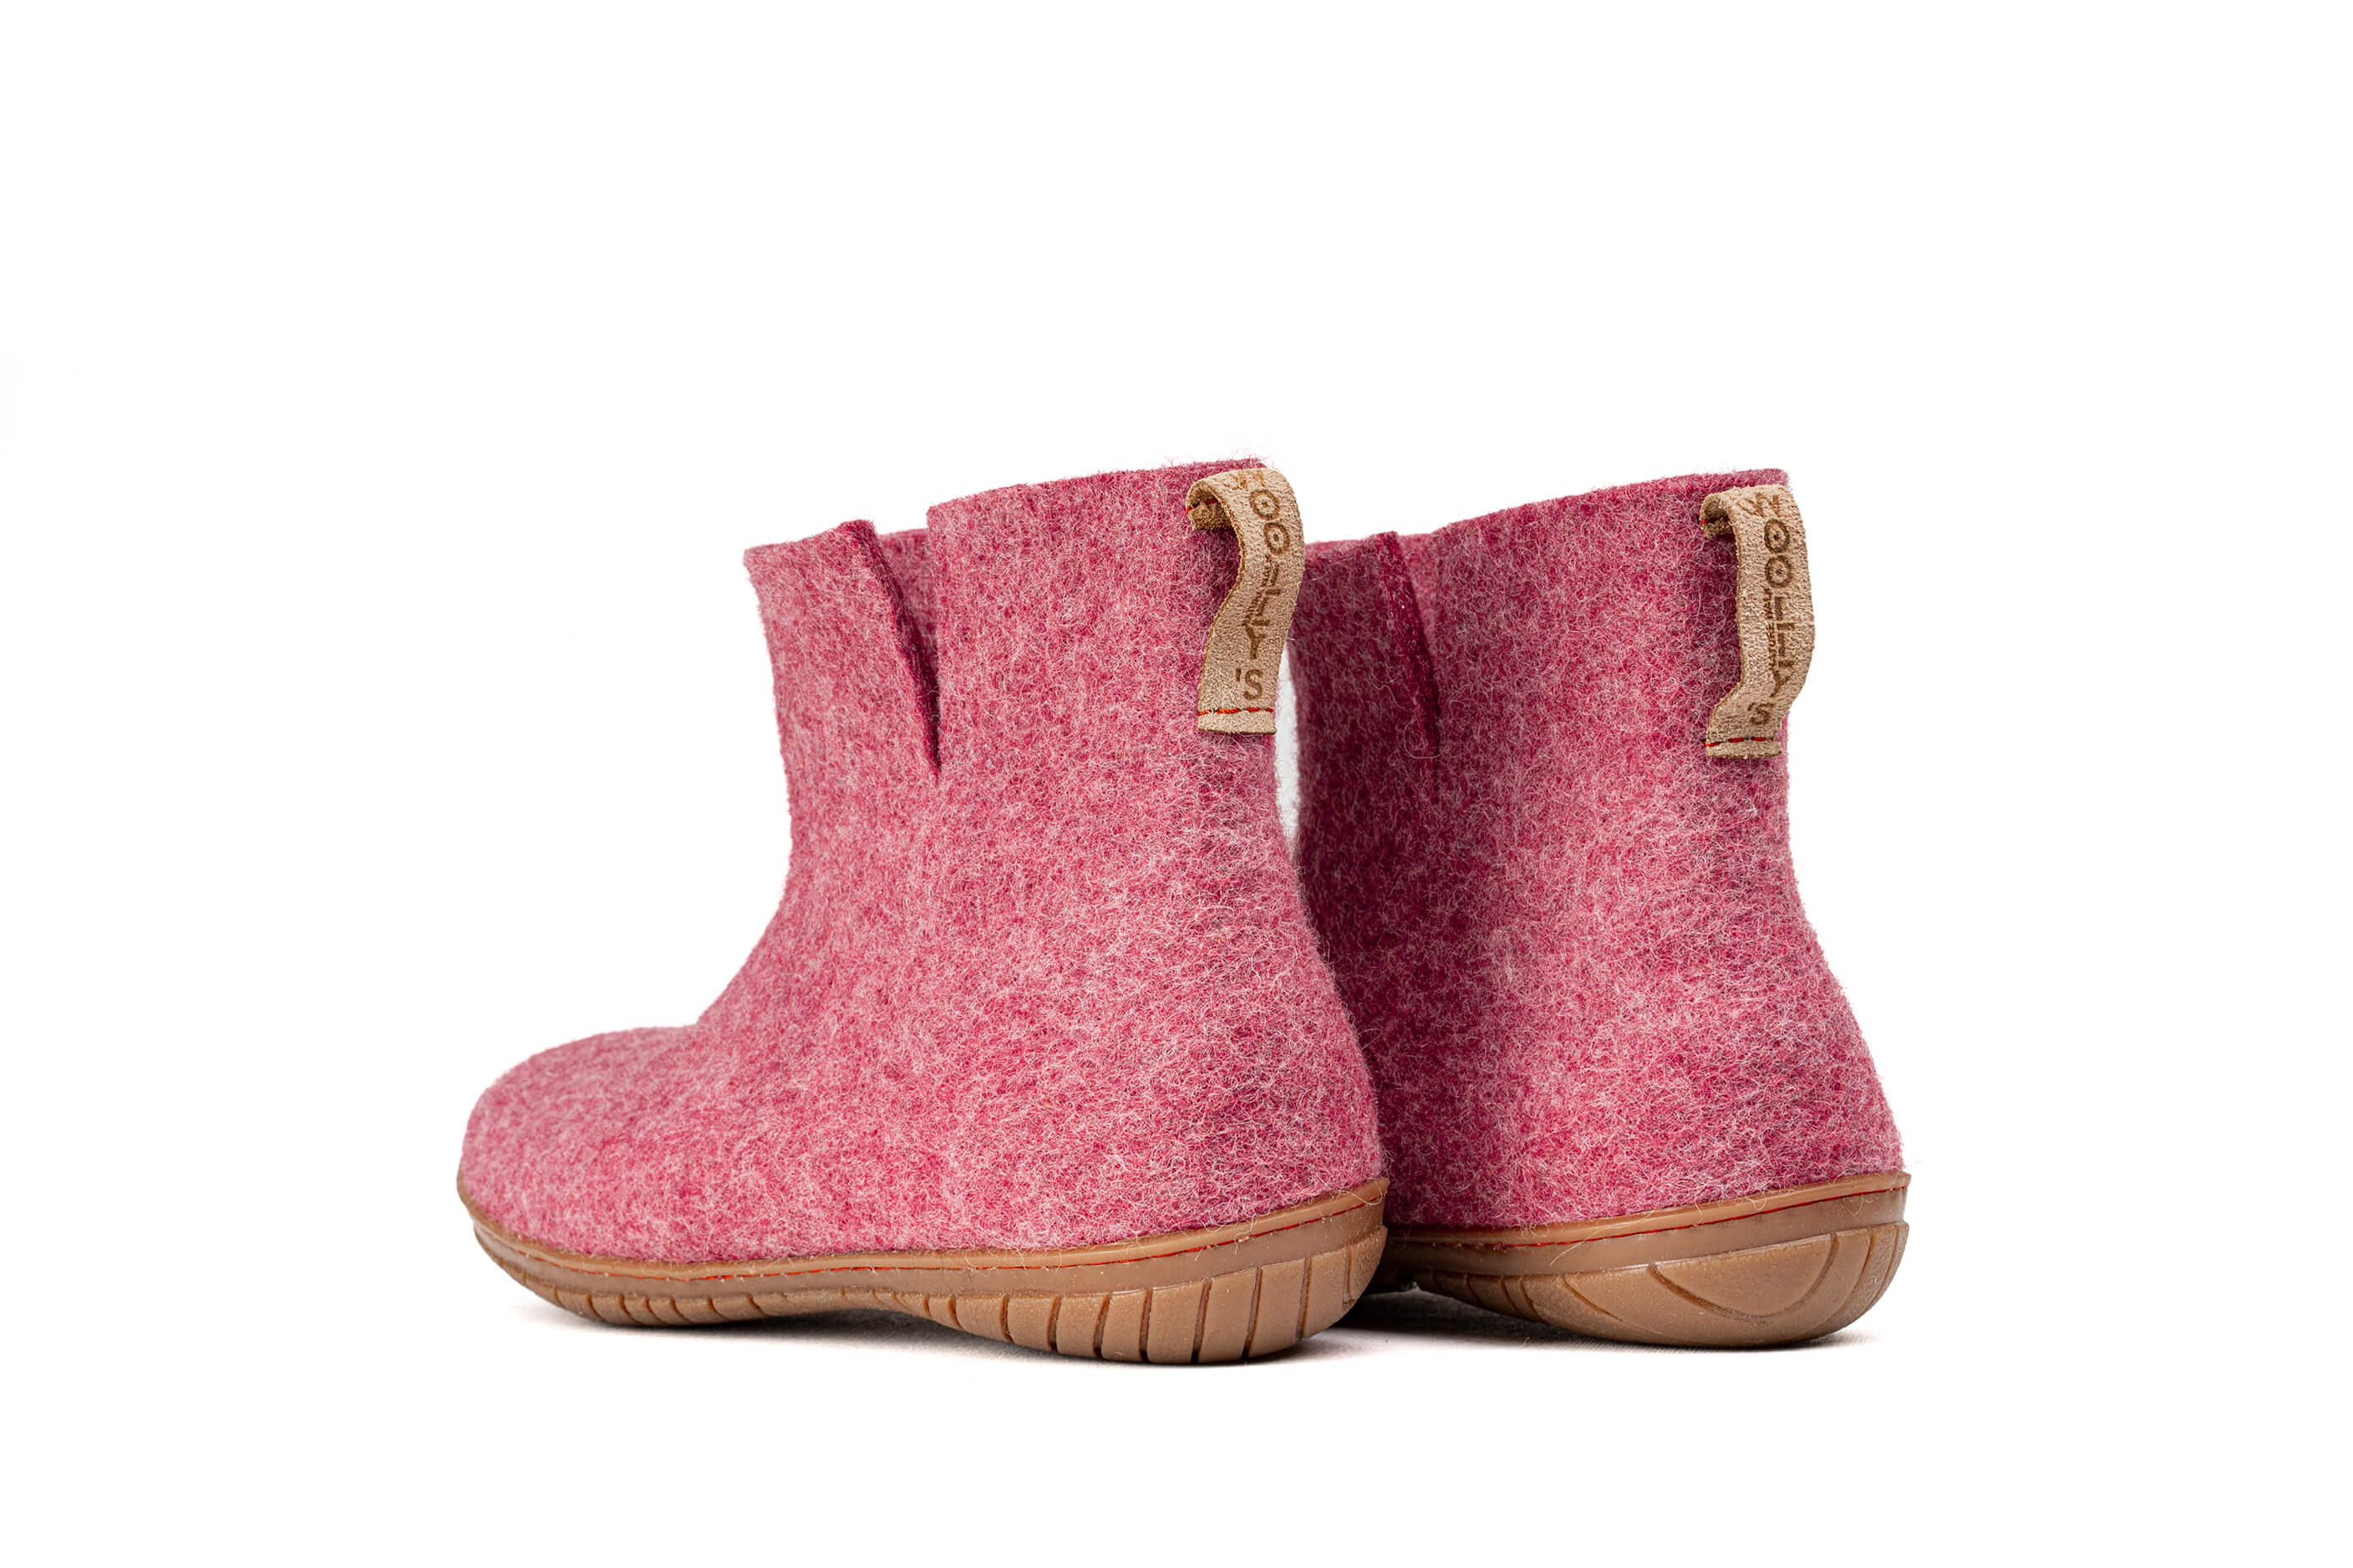 Outdoor Low Boots With Rubber Sole - Cherry Pink